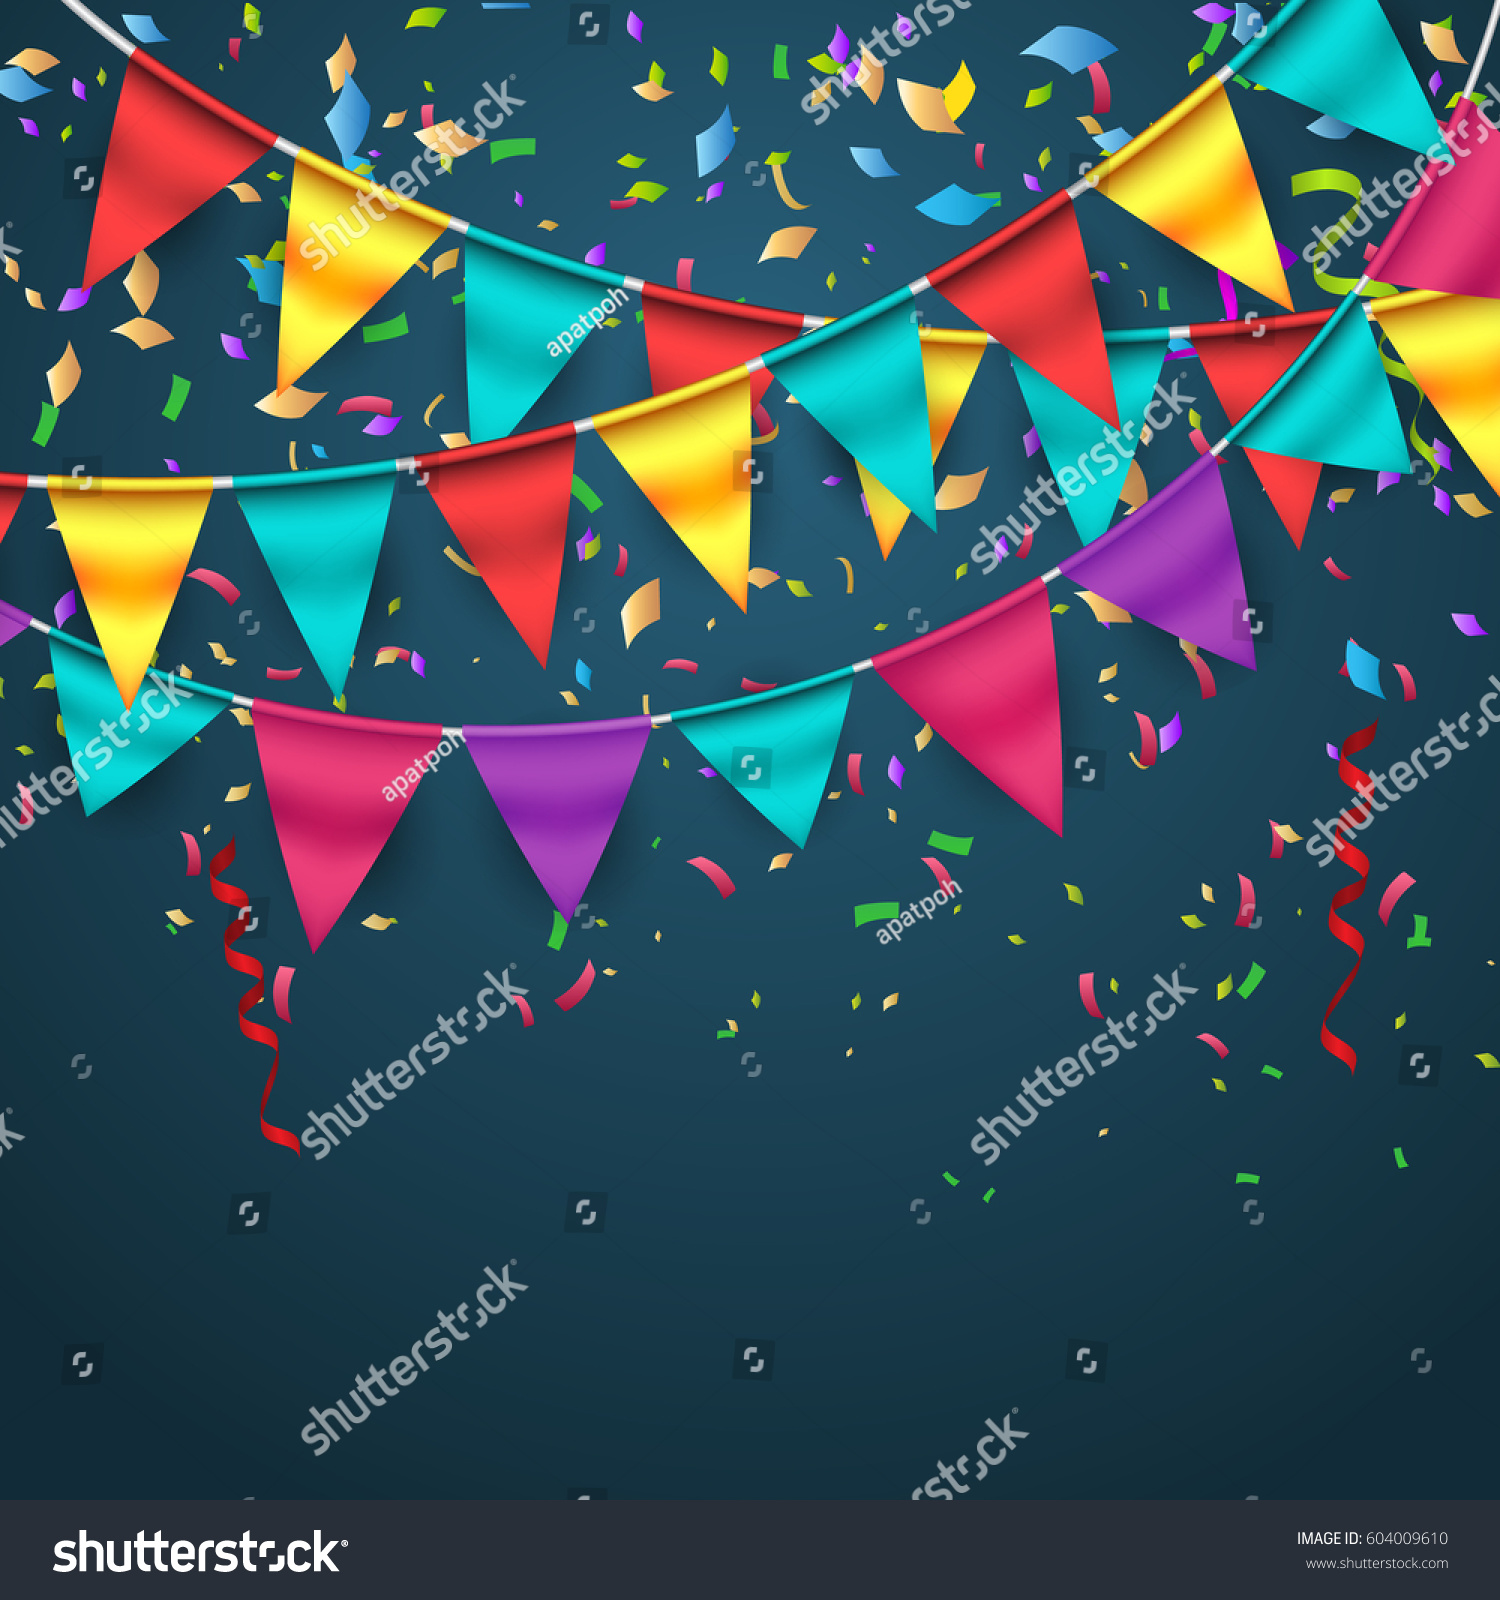 Celebrate Banner Party Flags Confetti Vector Stock Vector (Royalty Free ...